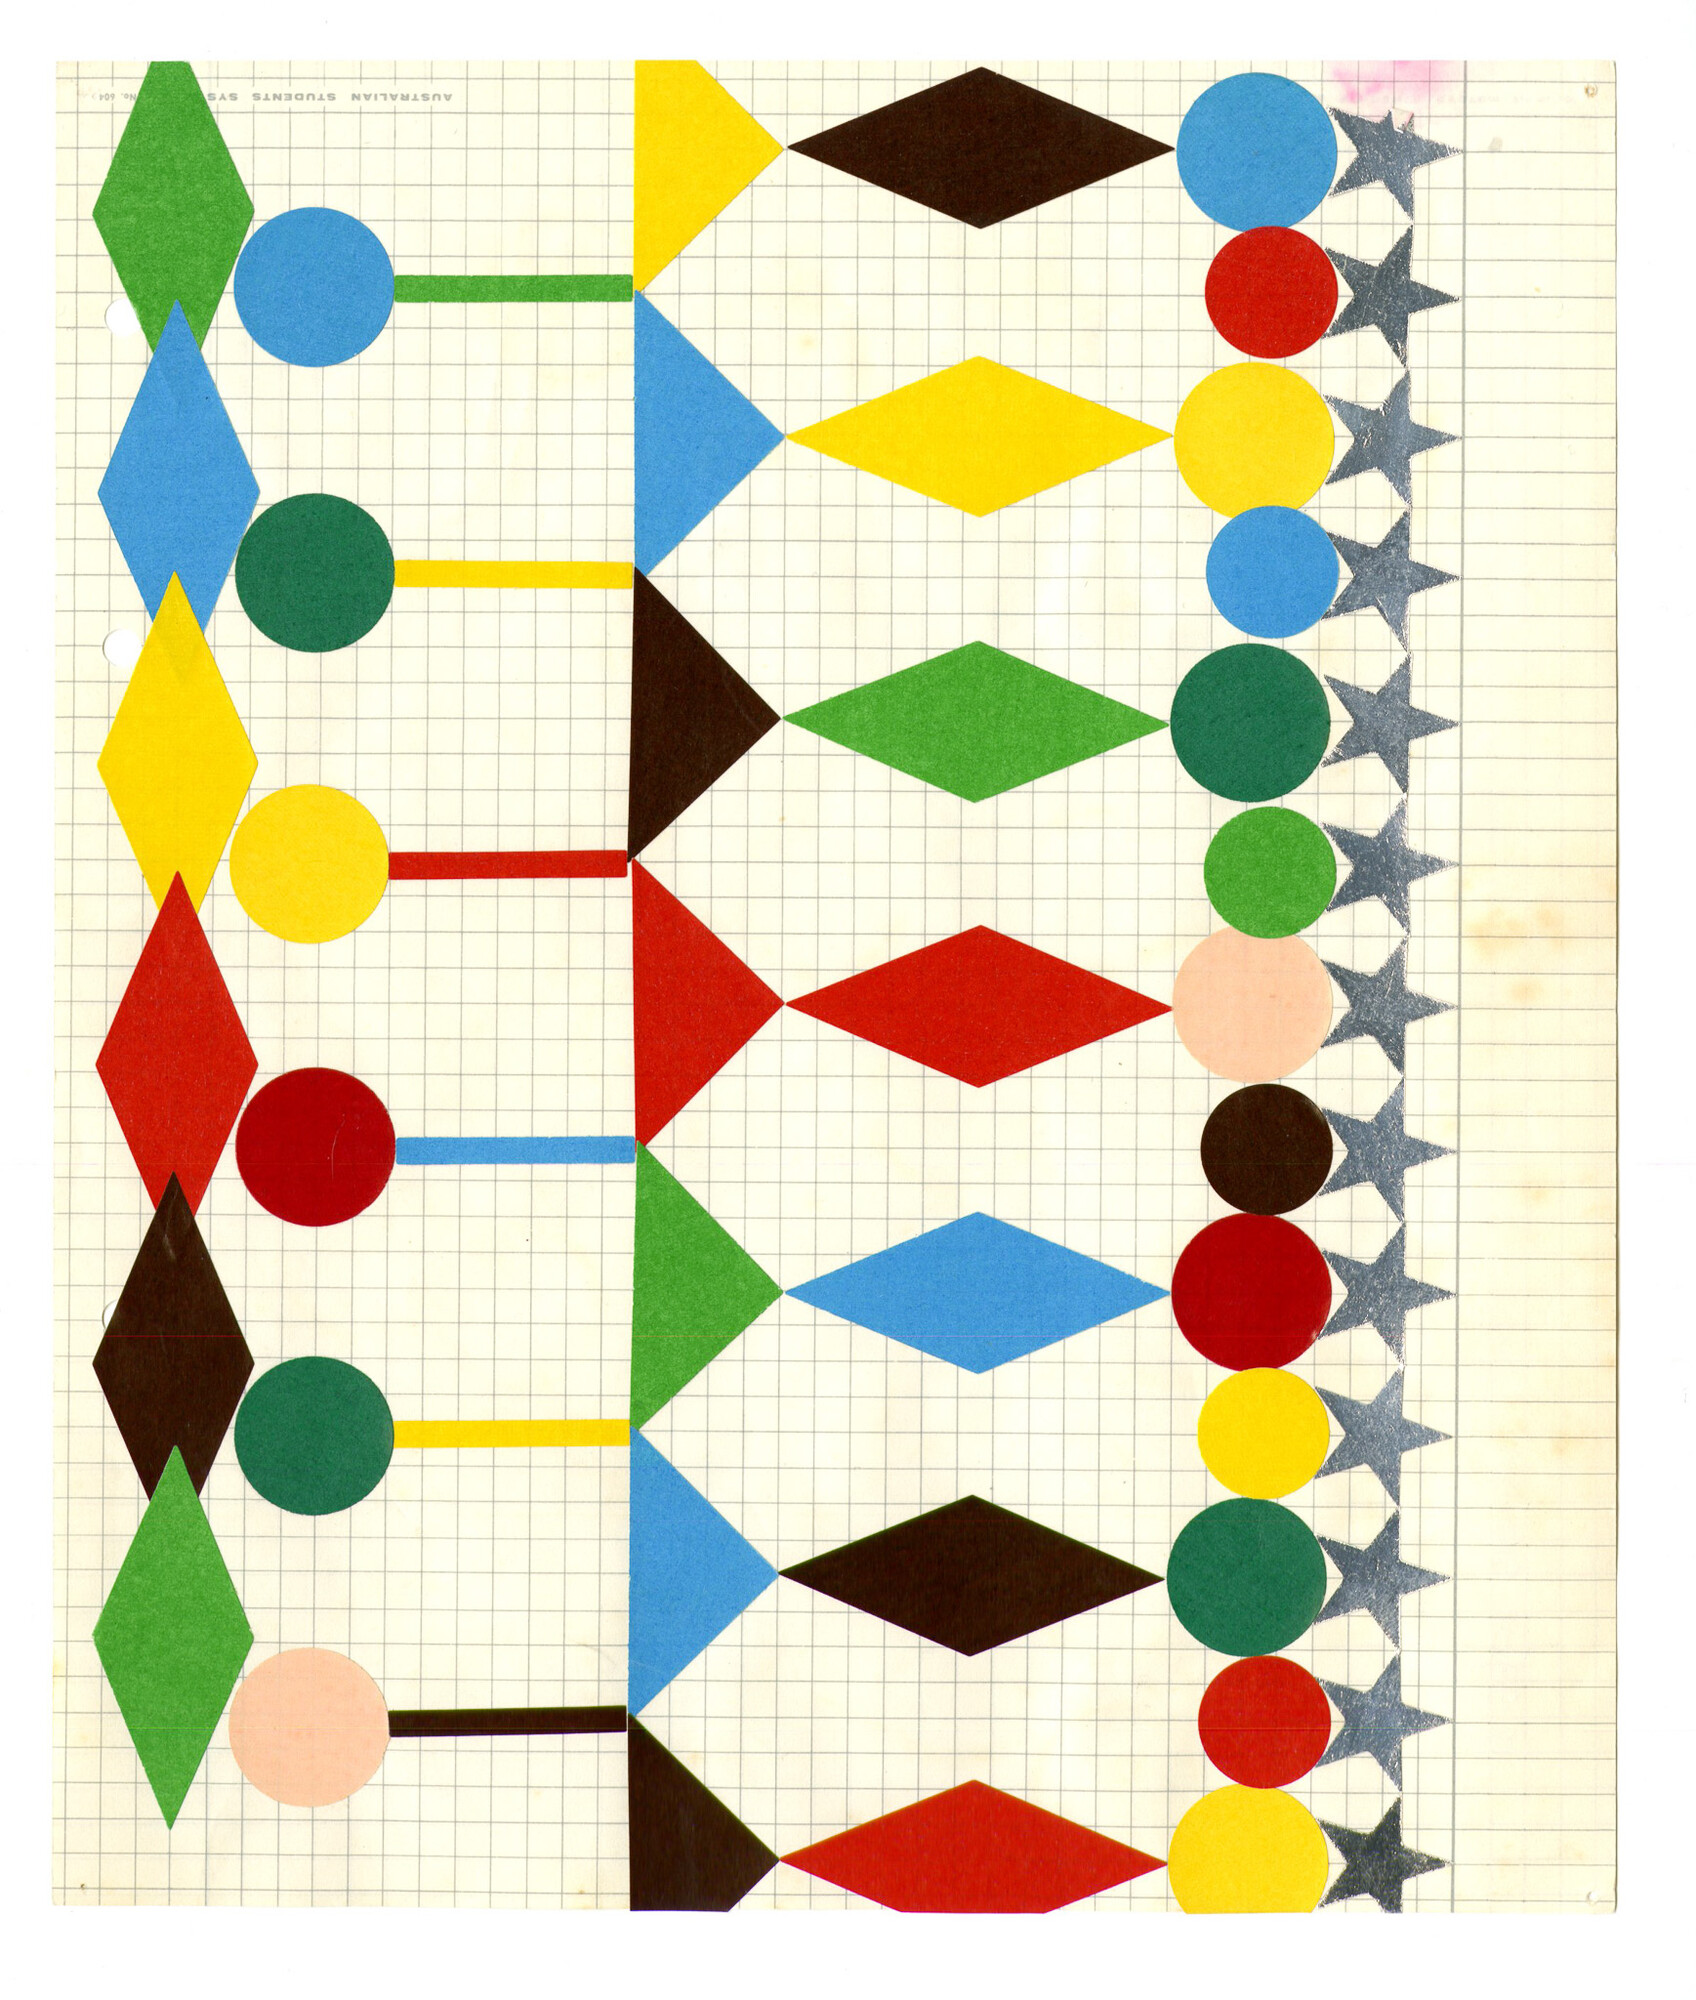 Vivienne Binns, <em>drawings, no19</em>, 1965-6, stickers on graph paper, 22.0 x 18.5 cm. Courtesy of the artist and Sutton Gallery.